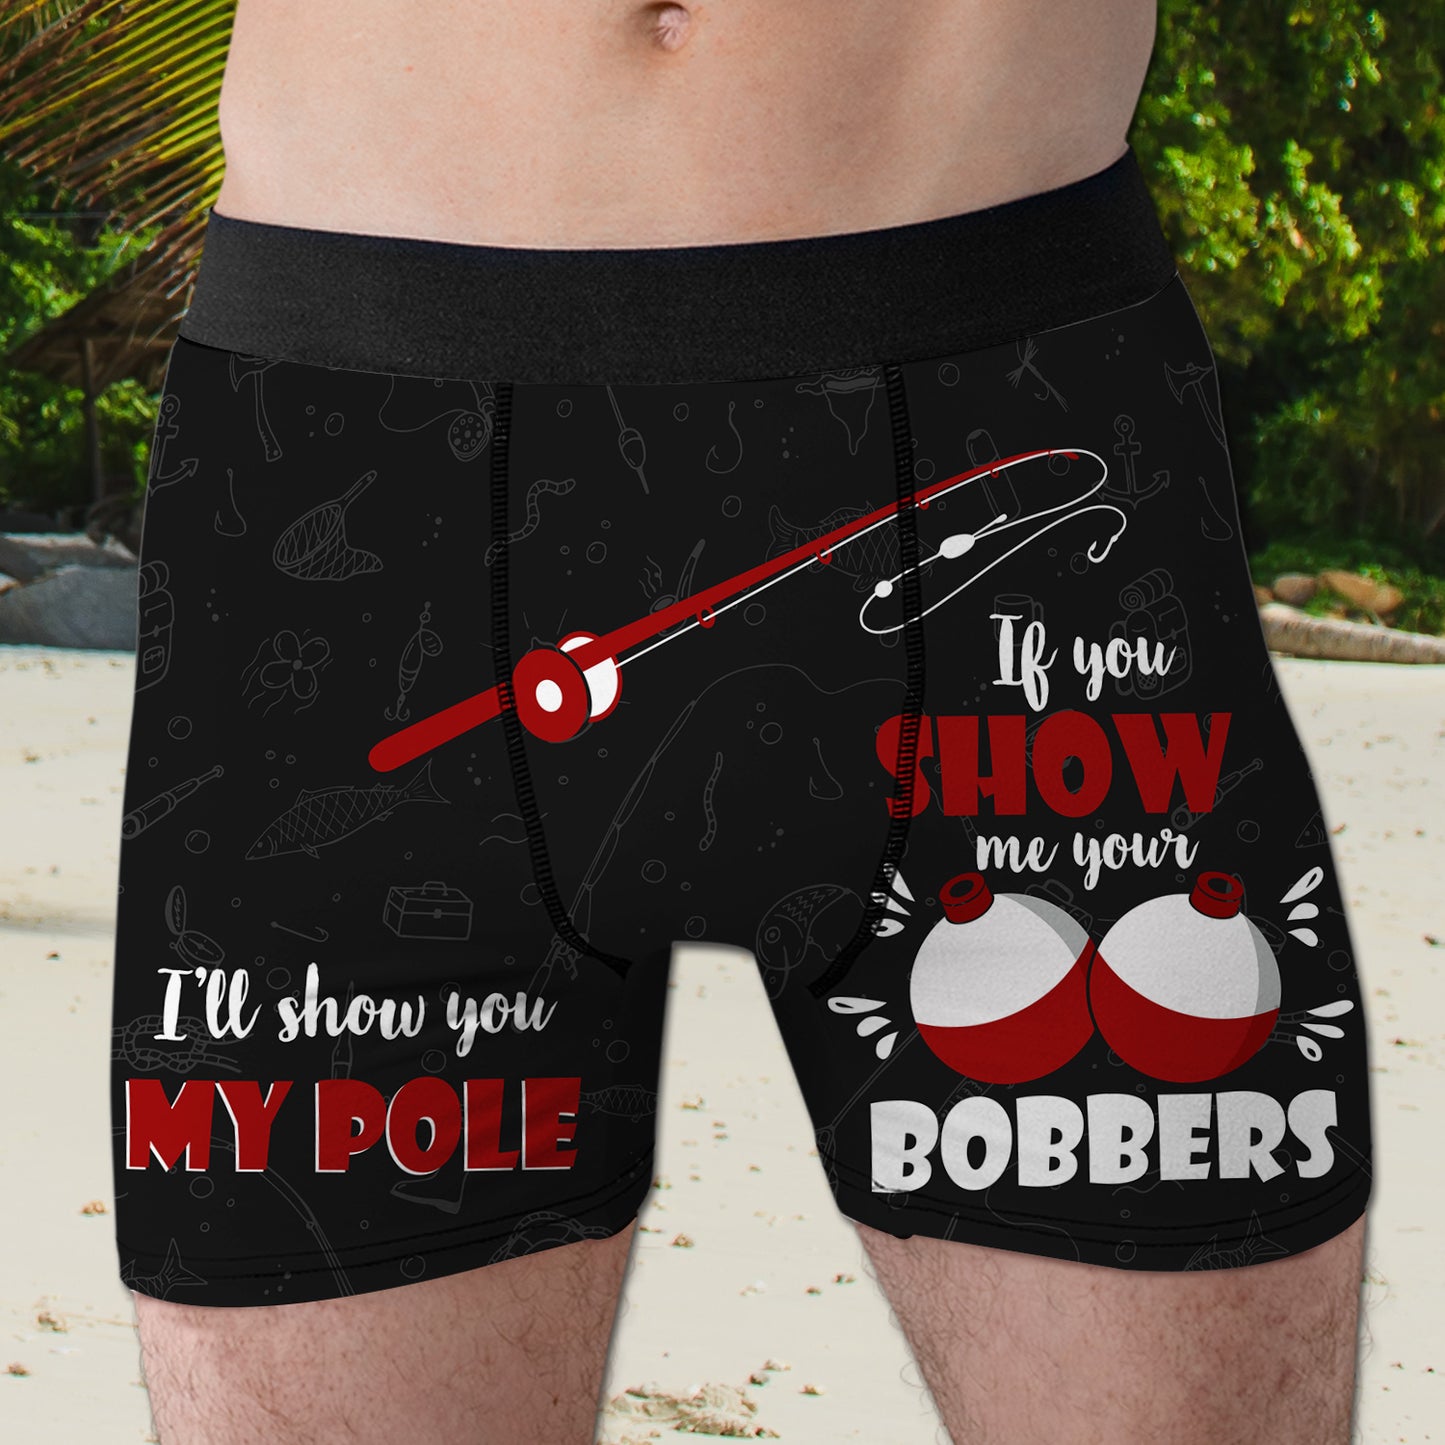 I'll Show You My Pole If You Show Me Bobbers Men's Boxer Brief